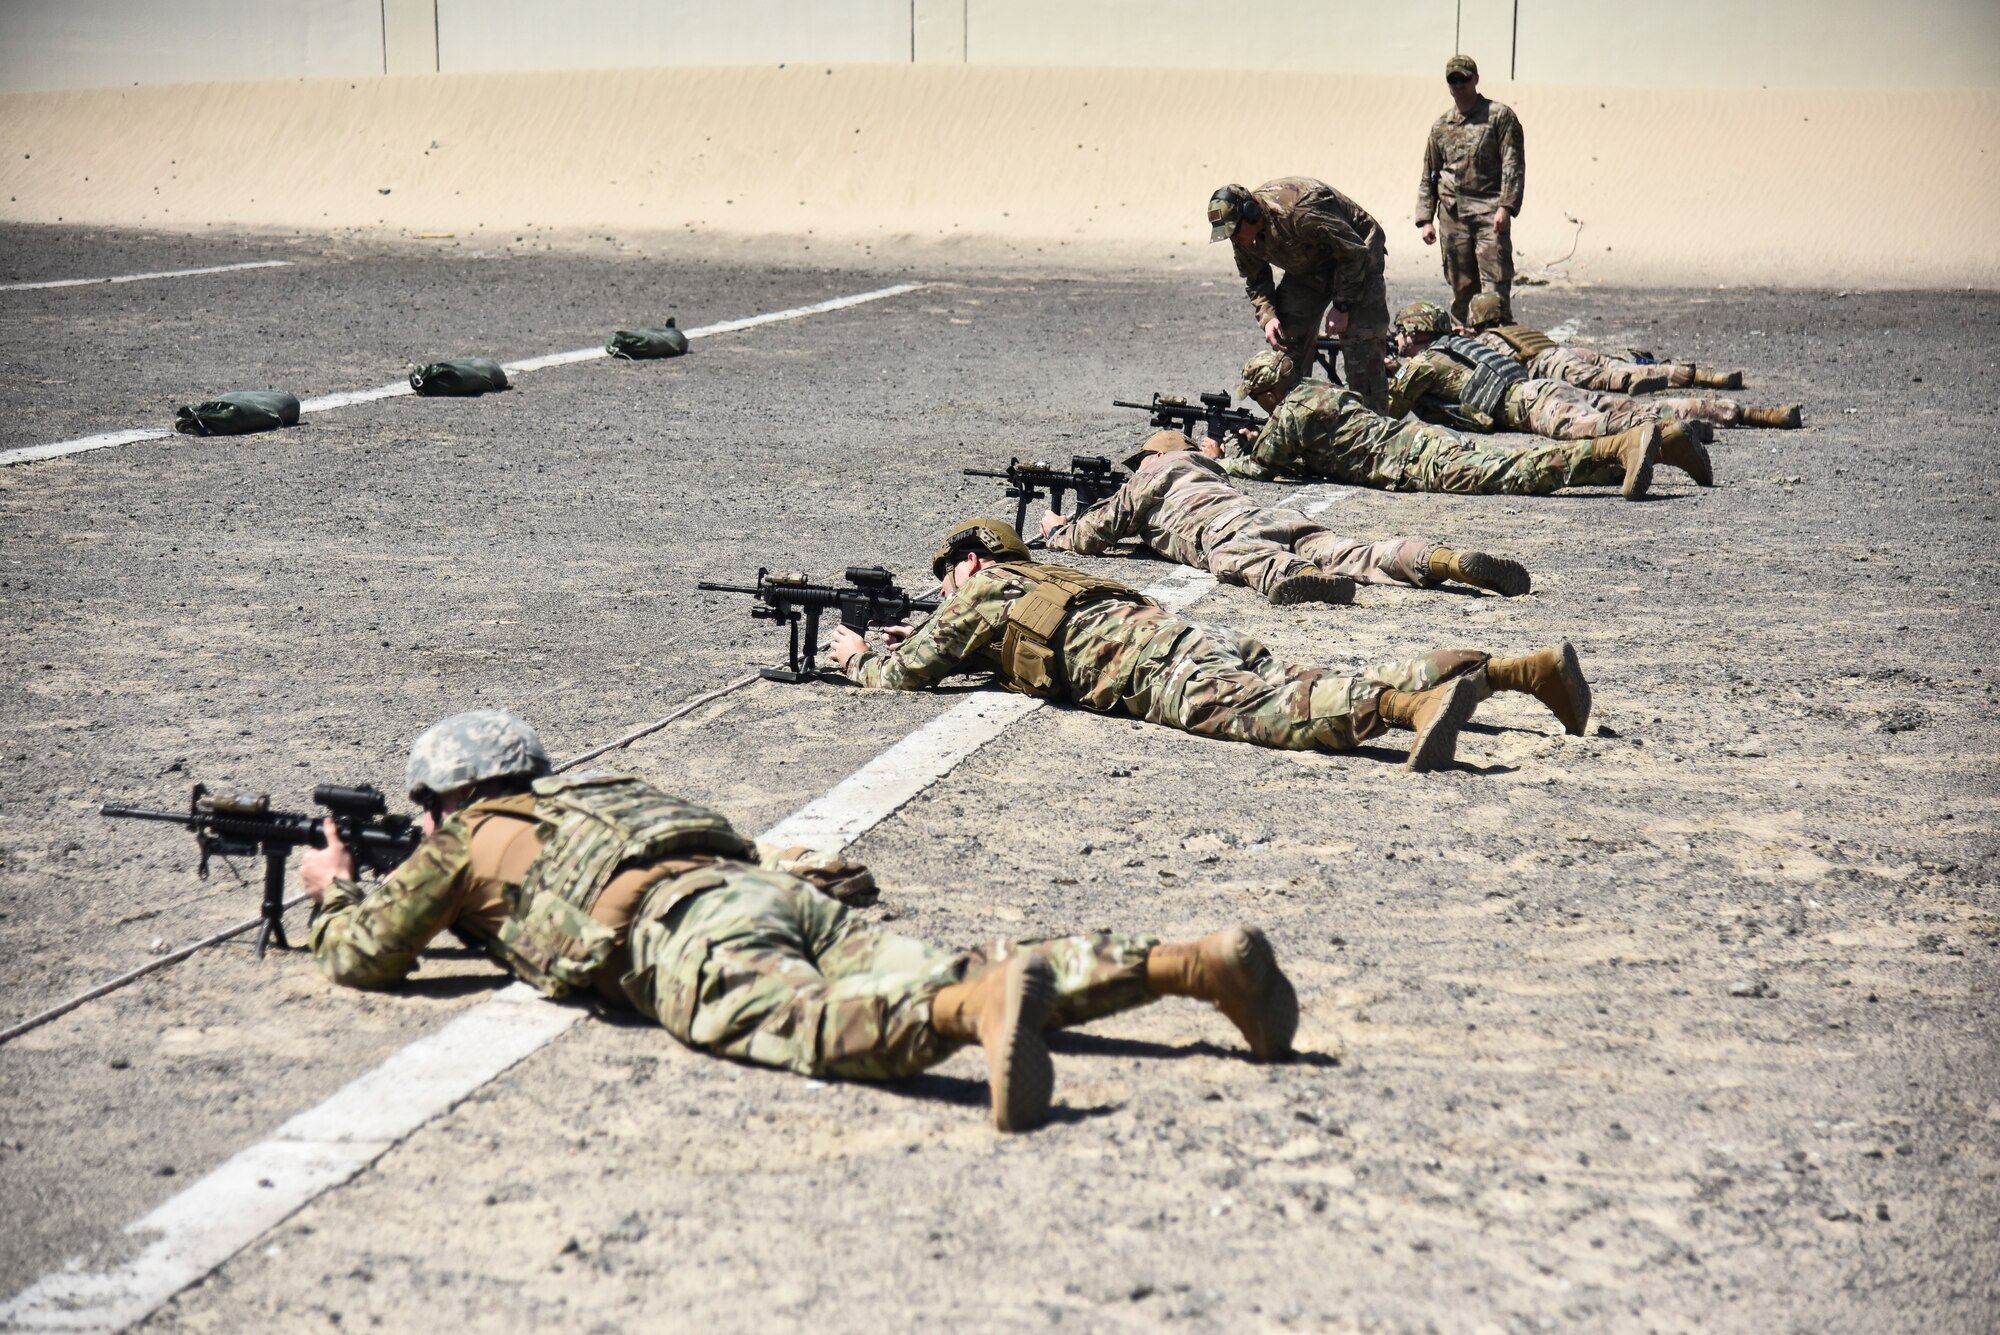 Airmen assigned to the 380th Expeditionary Security Forces Squadron fire their M4 Carbine weapons at Al Dhafra Air Base, United Arab Emirates, March 8, 2019. The 380th ESFS members used the method of “zeroing” their weapons – firing live rounds to ensure the accuracy as opposed to the method of bore sighting – a less reliable technique. (U.S. Air Force photo by Senior Airman Mya M. Crosby)